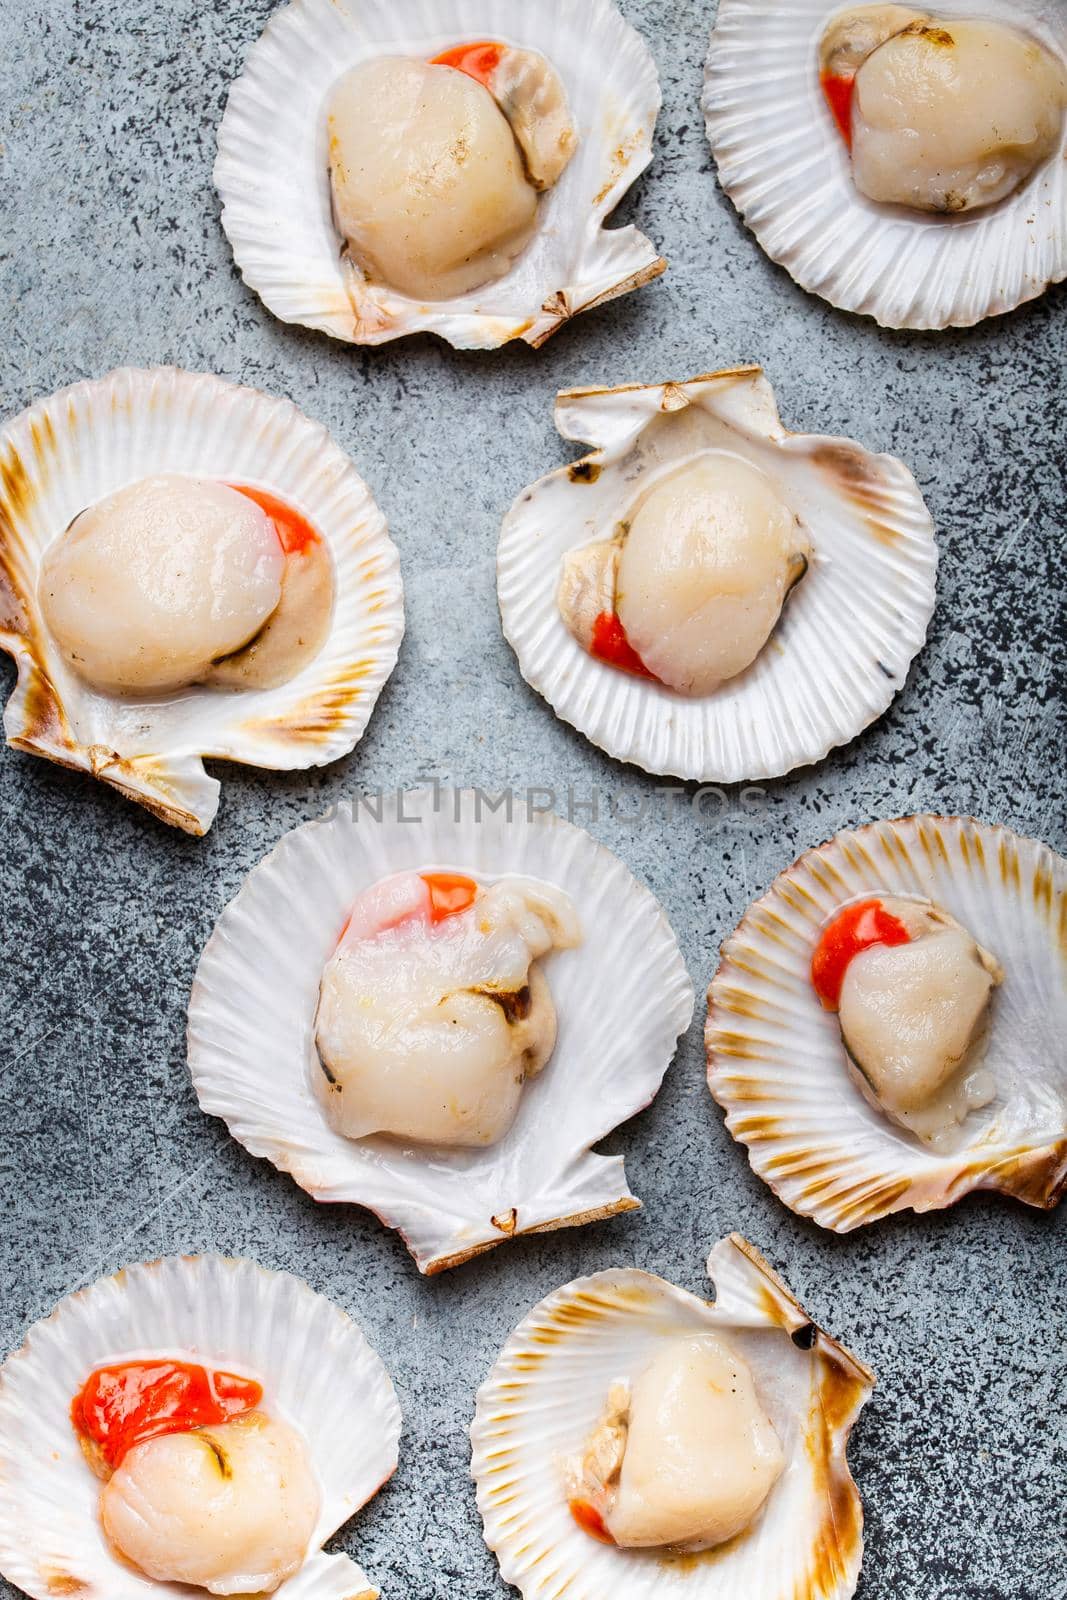 Raw fresh uncooked scallops in shells on grey rustic concrete background, top view, close-up. Seafood concept pattern